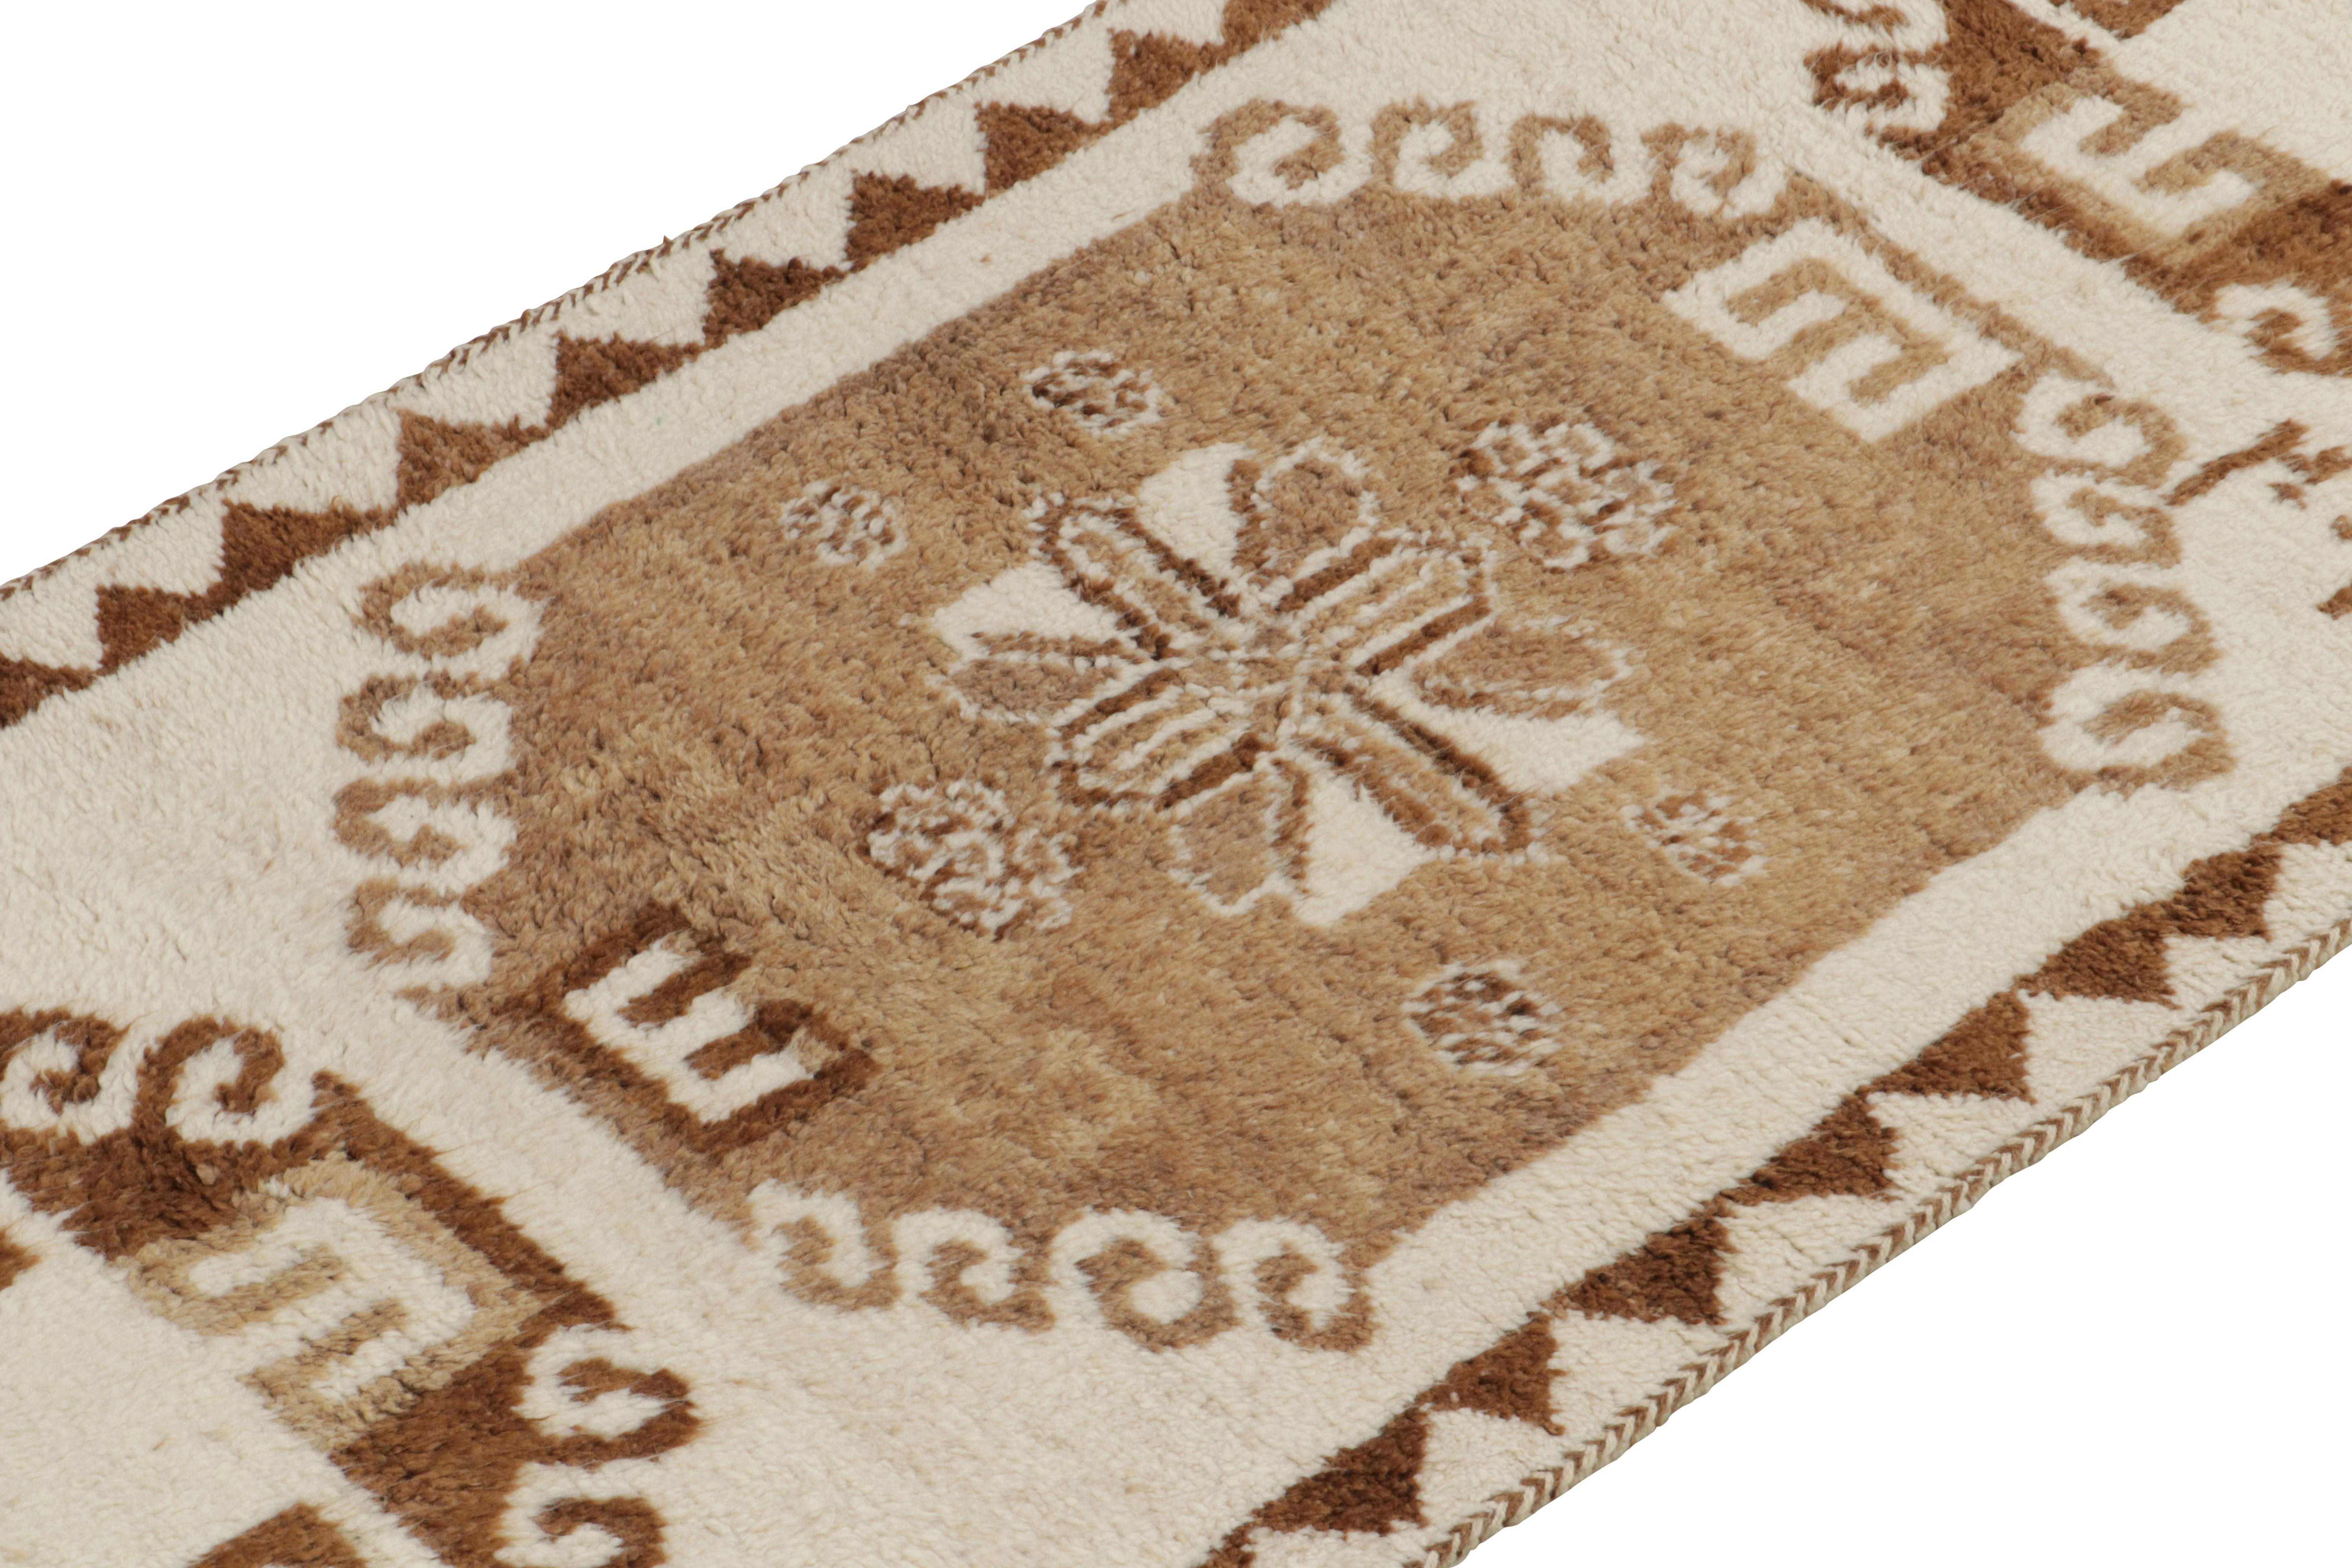 Hand-Knotted Vintage Tribal Runner in White & Beige-Brown Geometric Patterns by Rug & Kilim For Sale